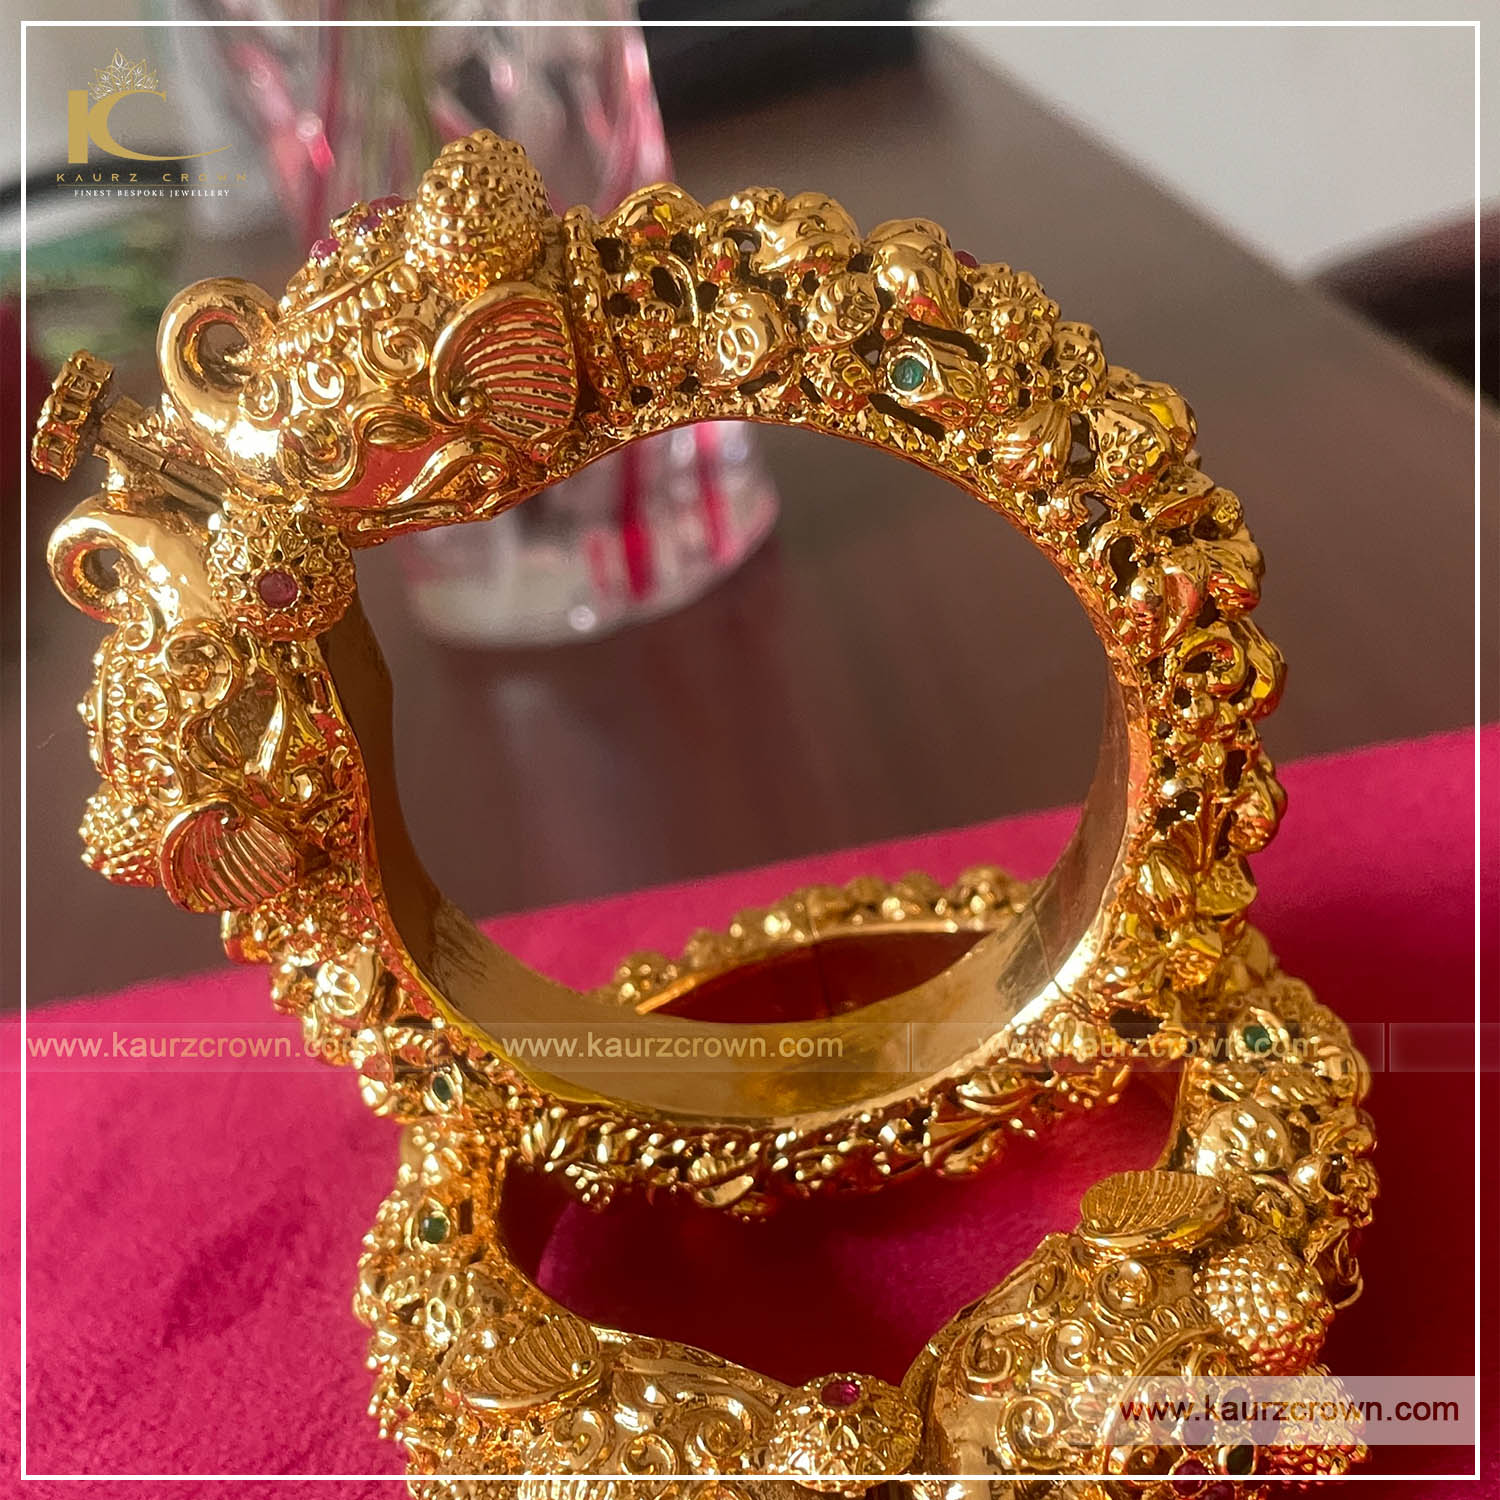 Surmai Traditional Antique Gold Plated Bangles – KaurzCrown.com